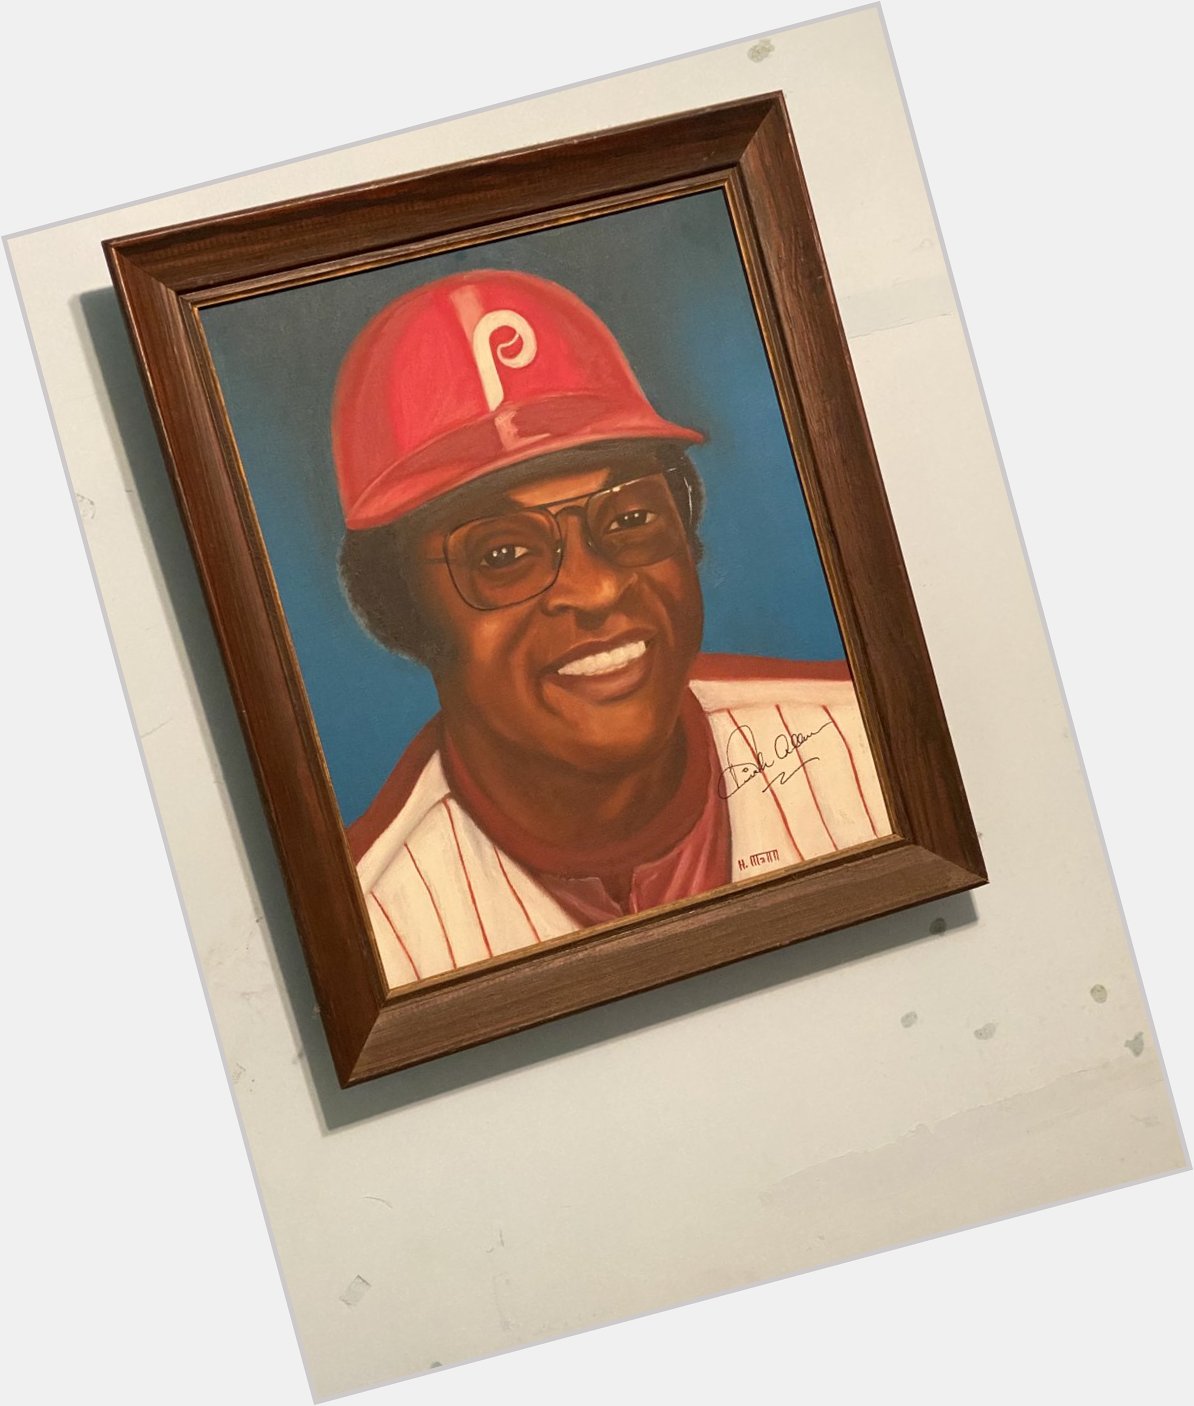 Happy Birthday in baseball heaven to Dick Allen. This all time great belongs in the Baseball Hall of Fame! 